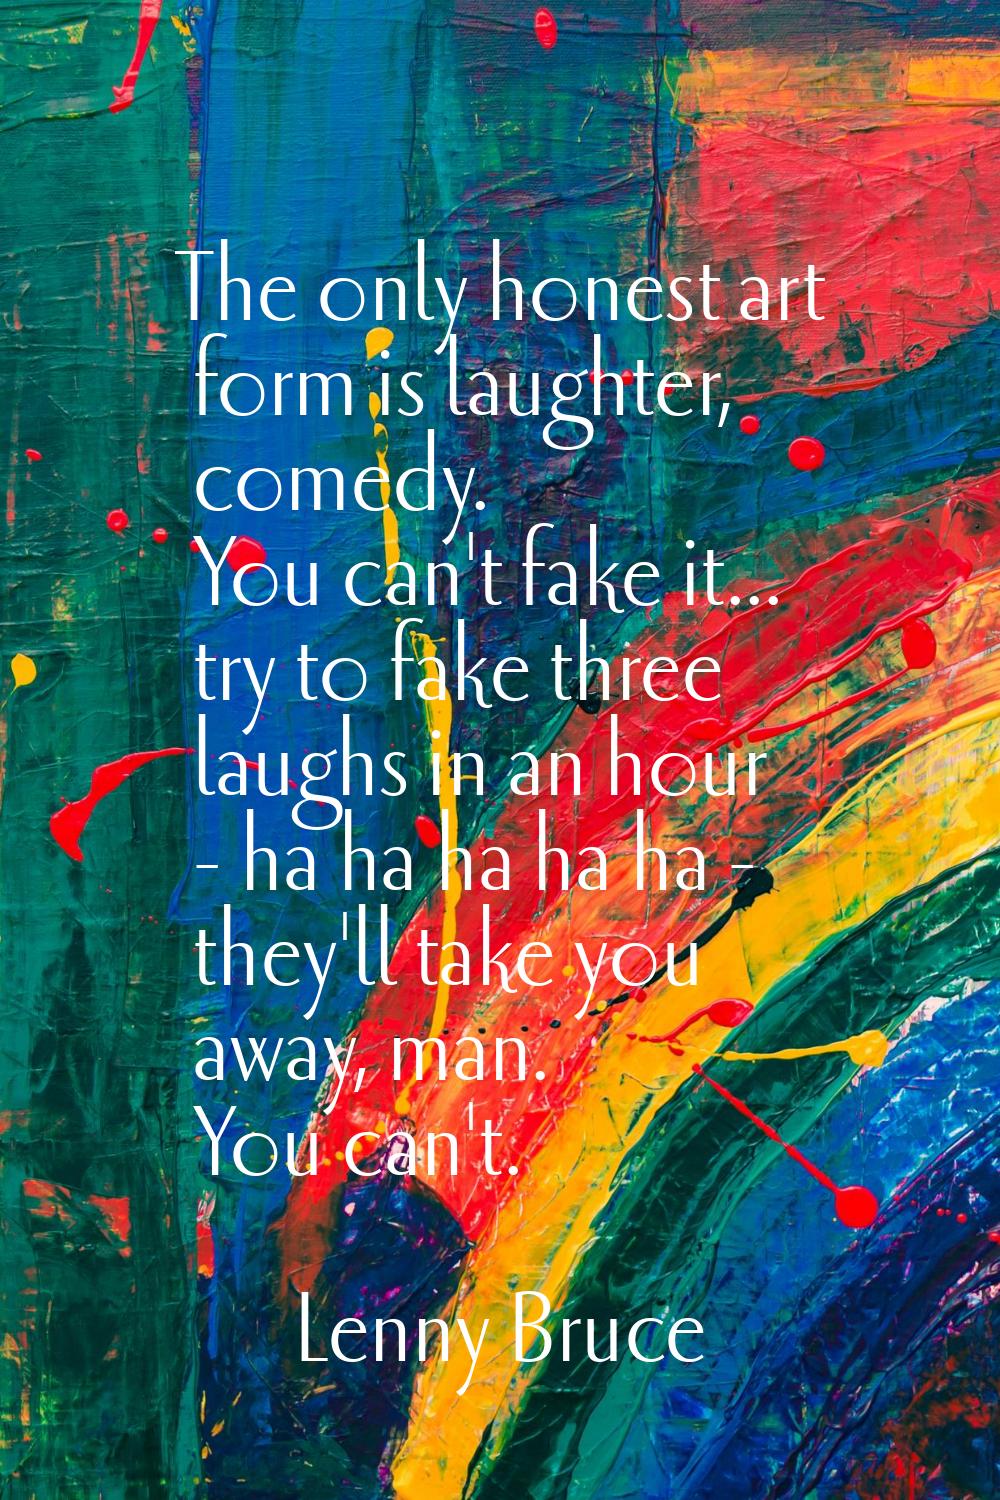 The only honest art form is laughter, comedy. You can't fake it... try to fake three laughs in an h